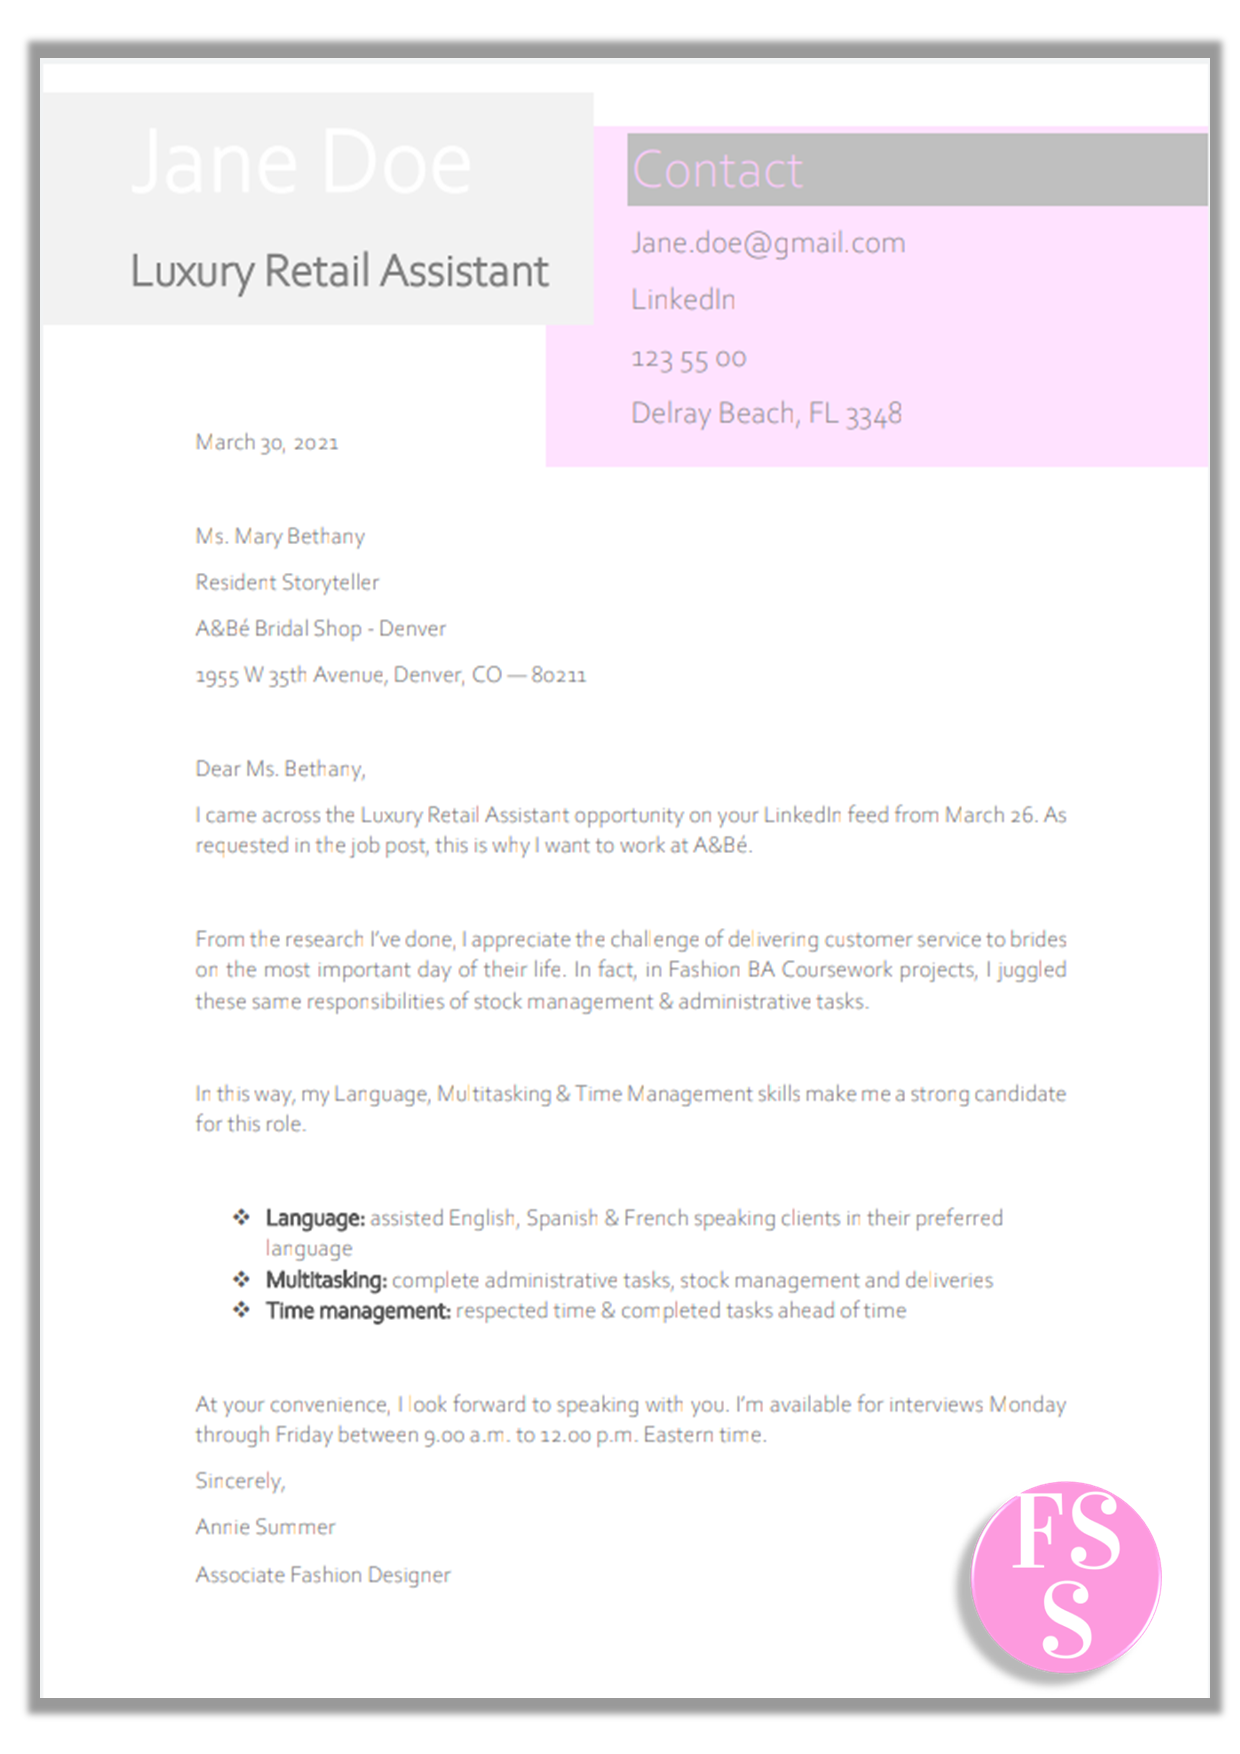 Single page Fashion student cover letter in white, pink and grey. 12-point font. Perfect to pair with a fashion design, PR or buyer internship resume.